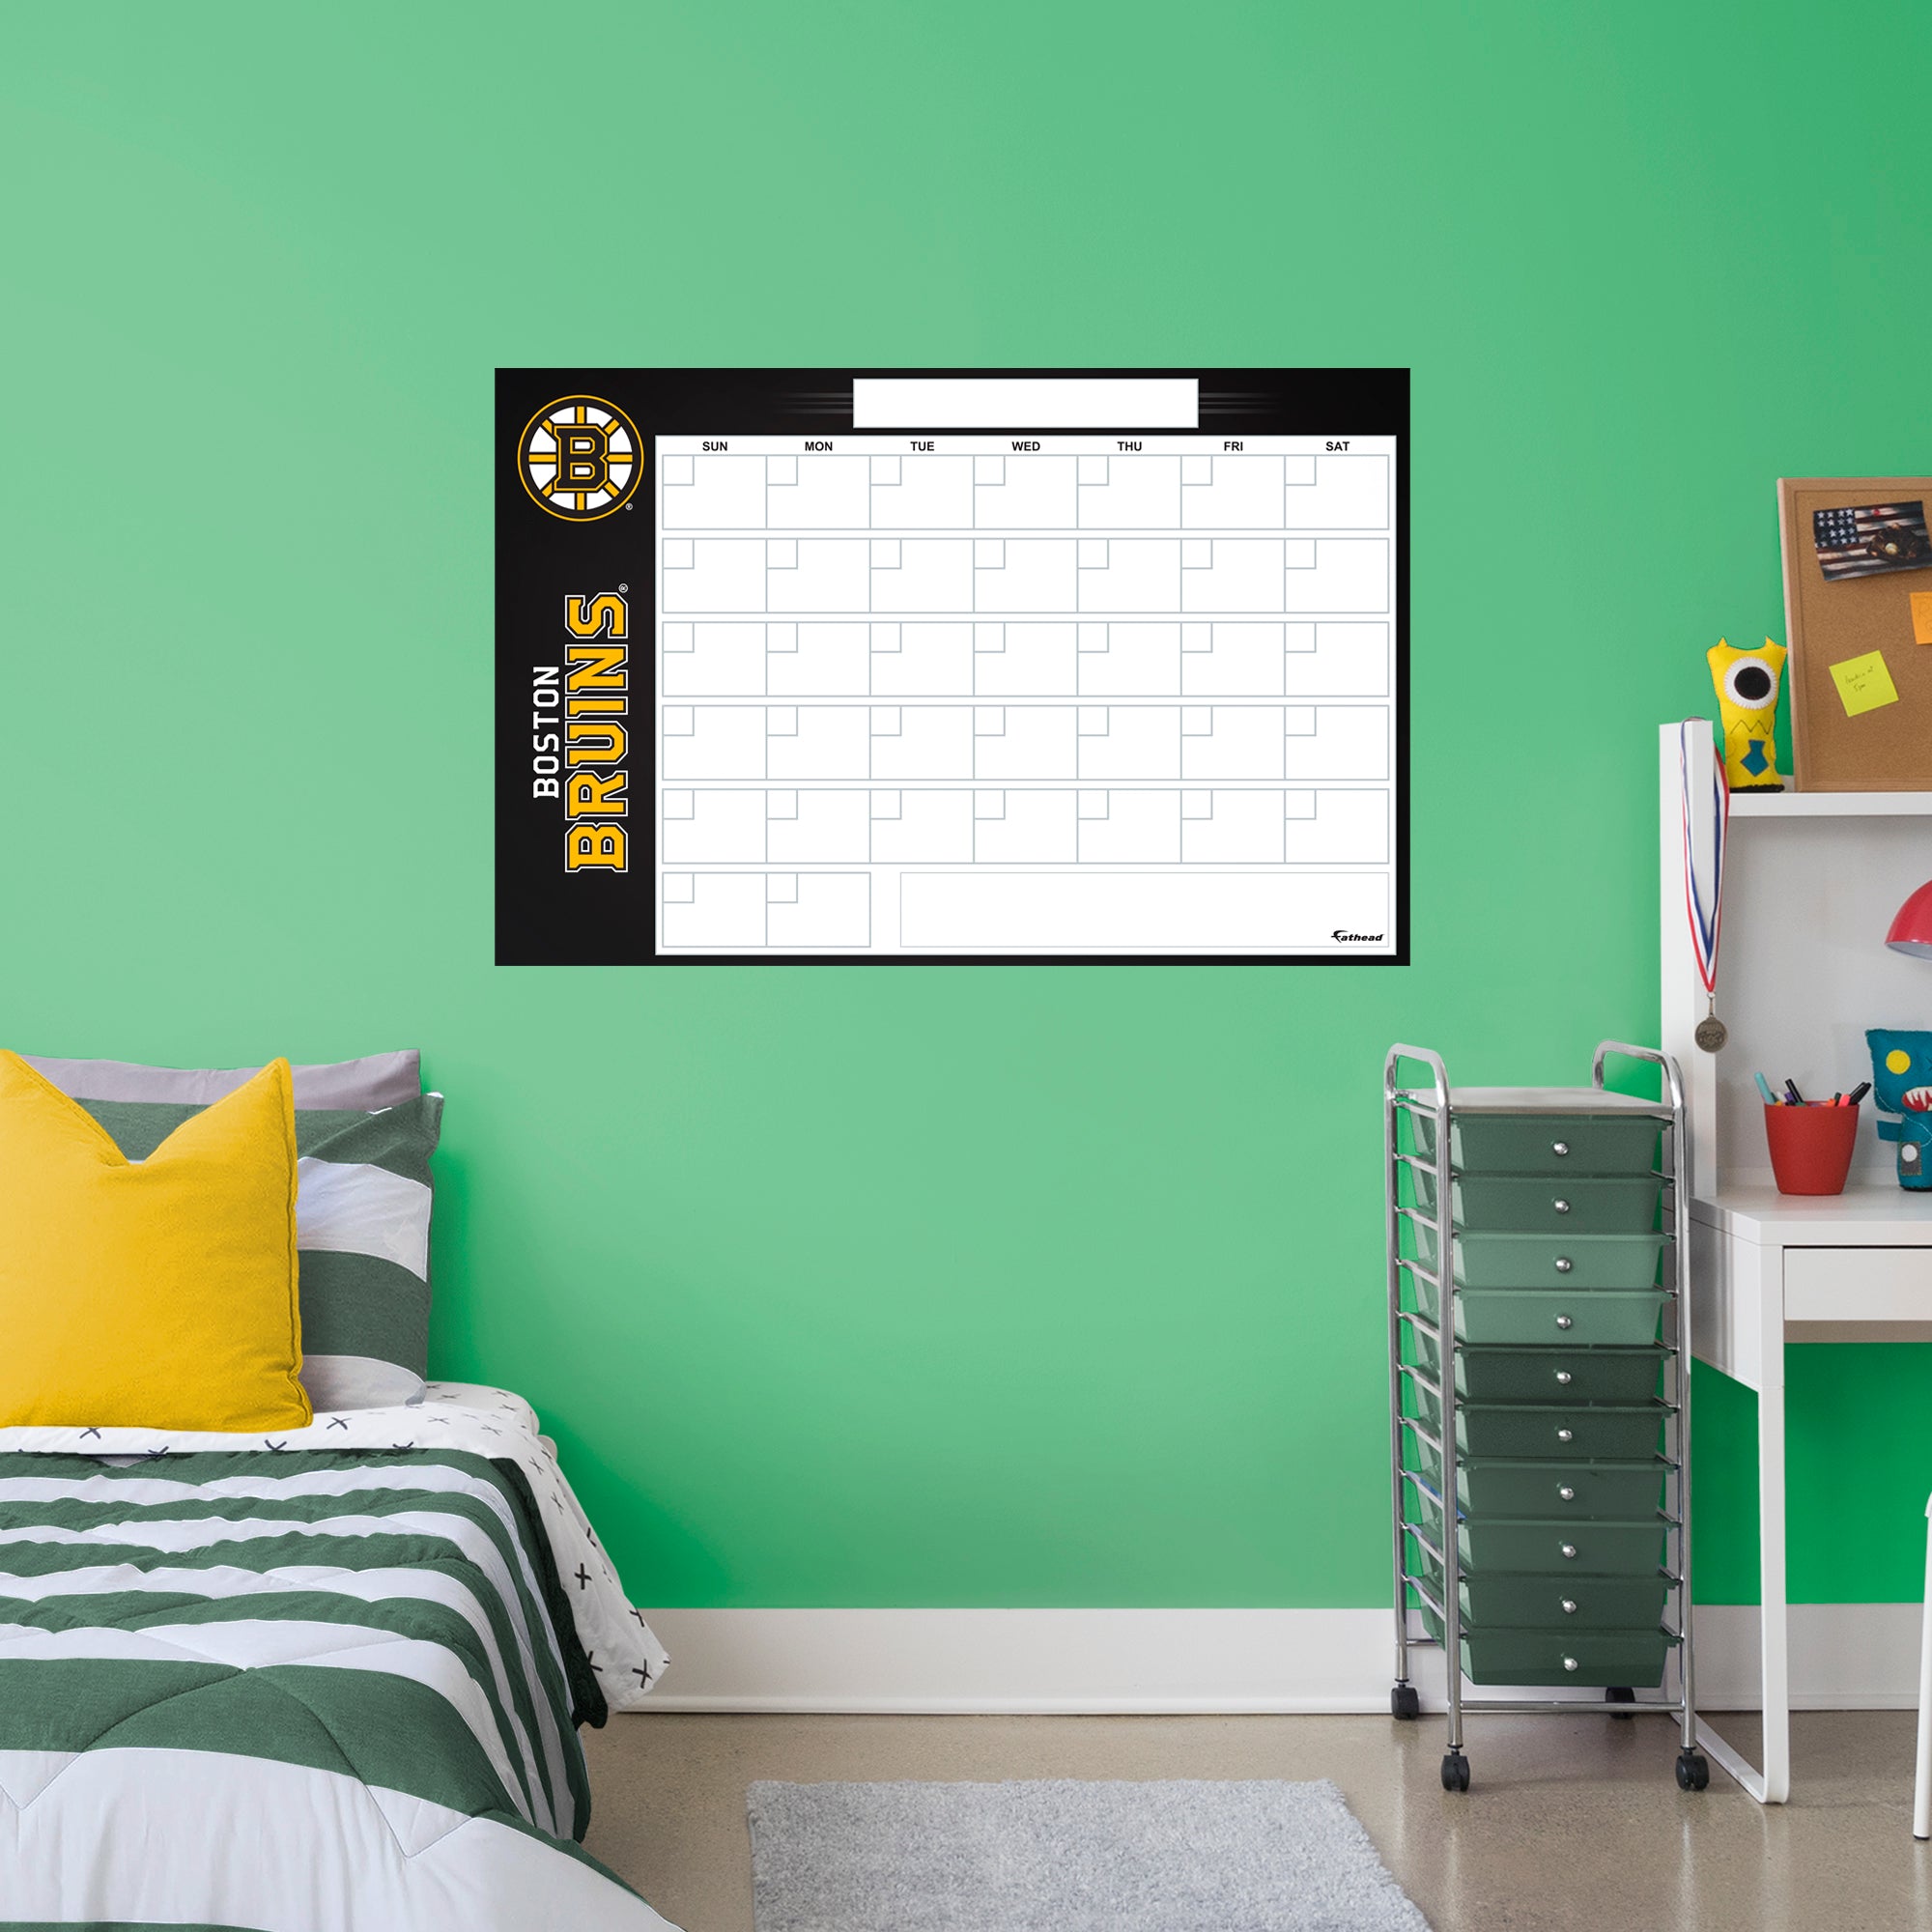 Boston Bruins Dry Erase Calendar - Officially Licensed NHL Removable Wall Decal Giant Decal (57"W x 34"H) by Fathead | Vinyl